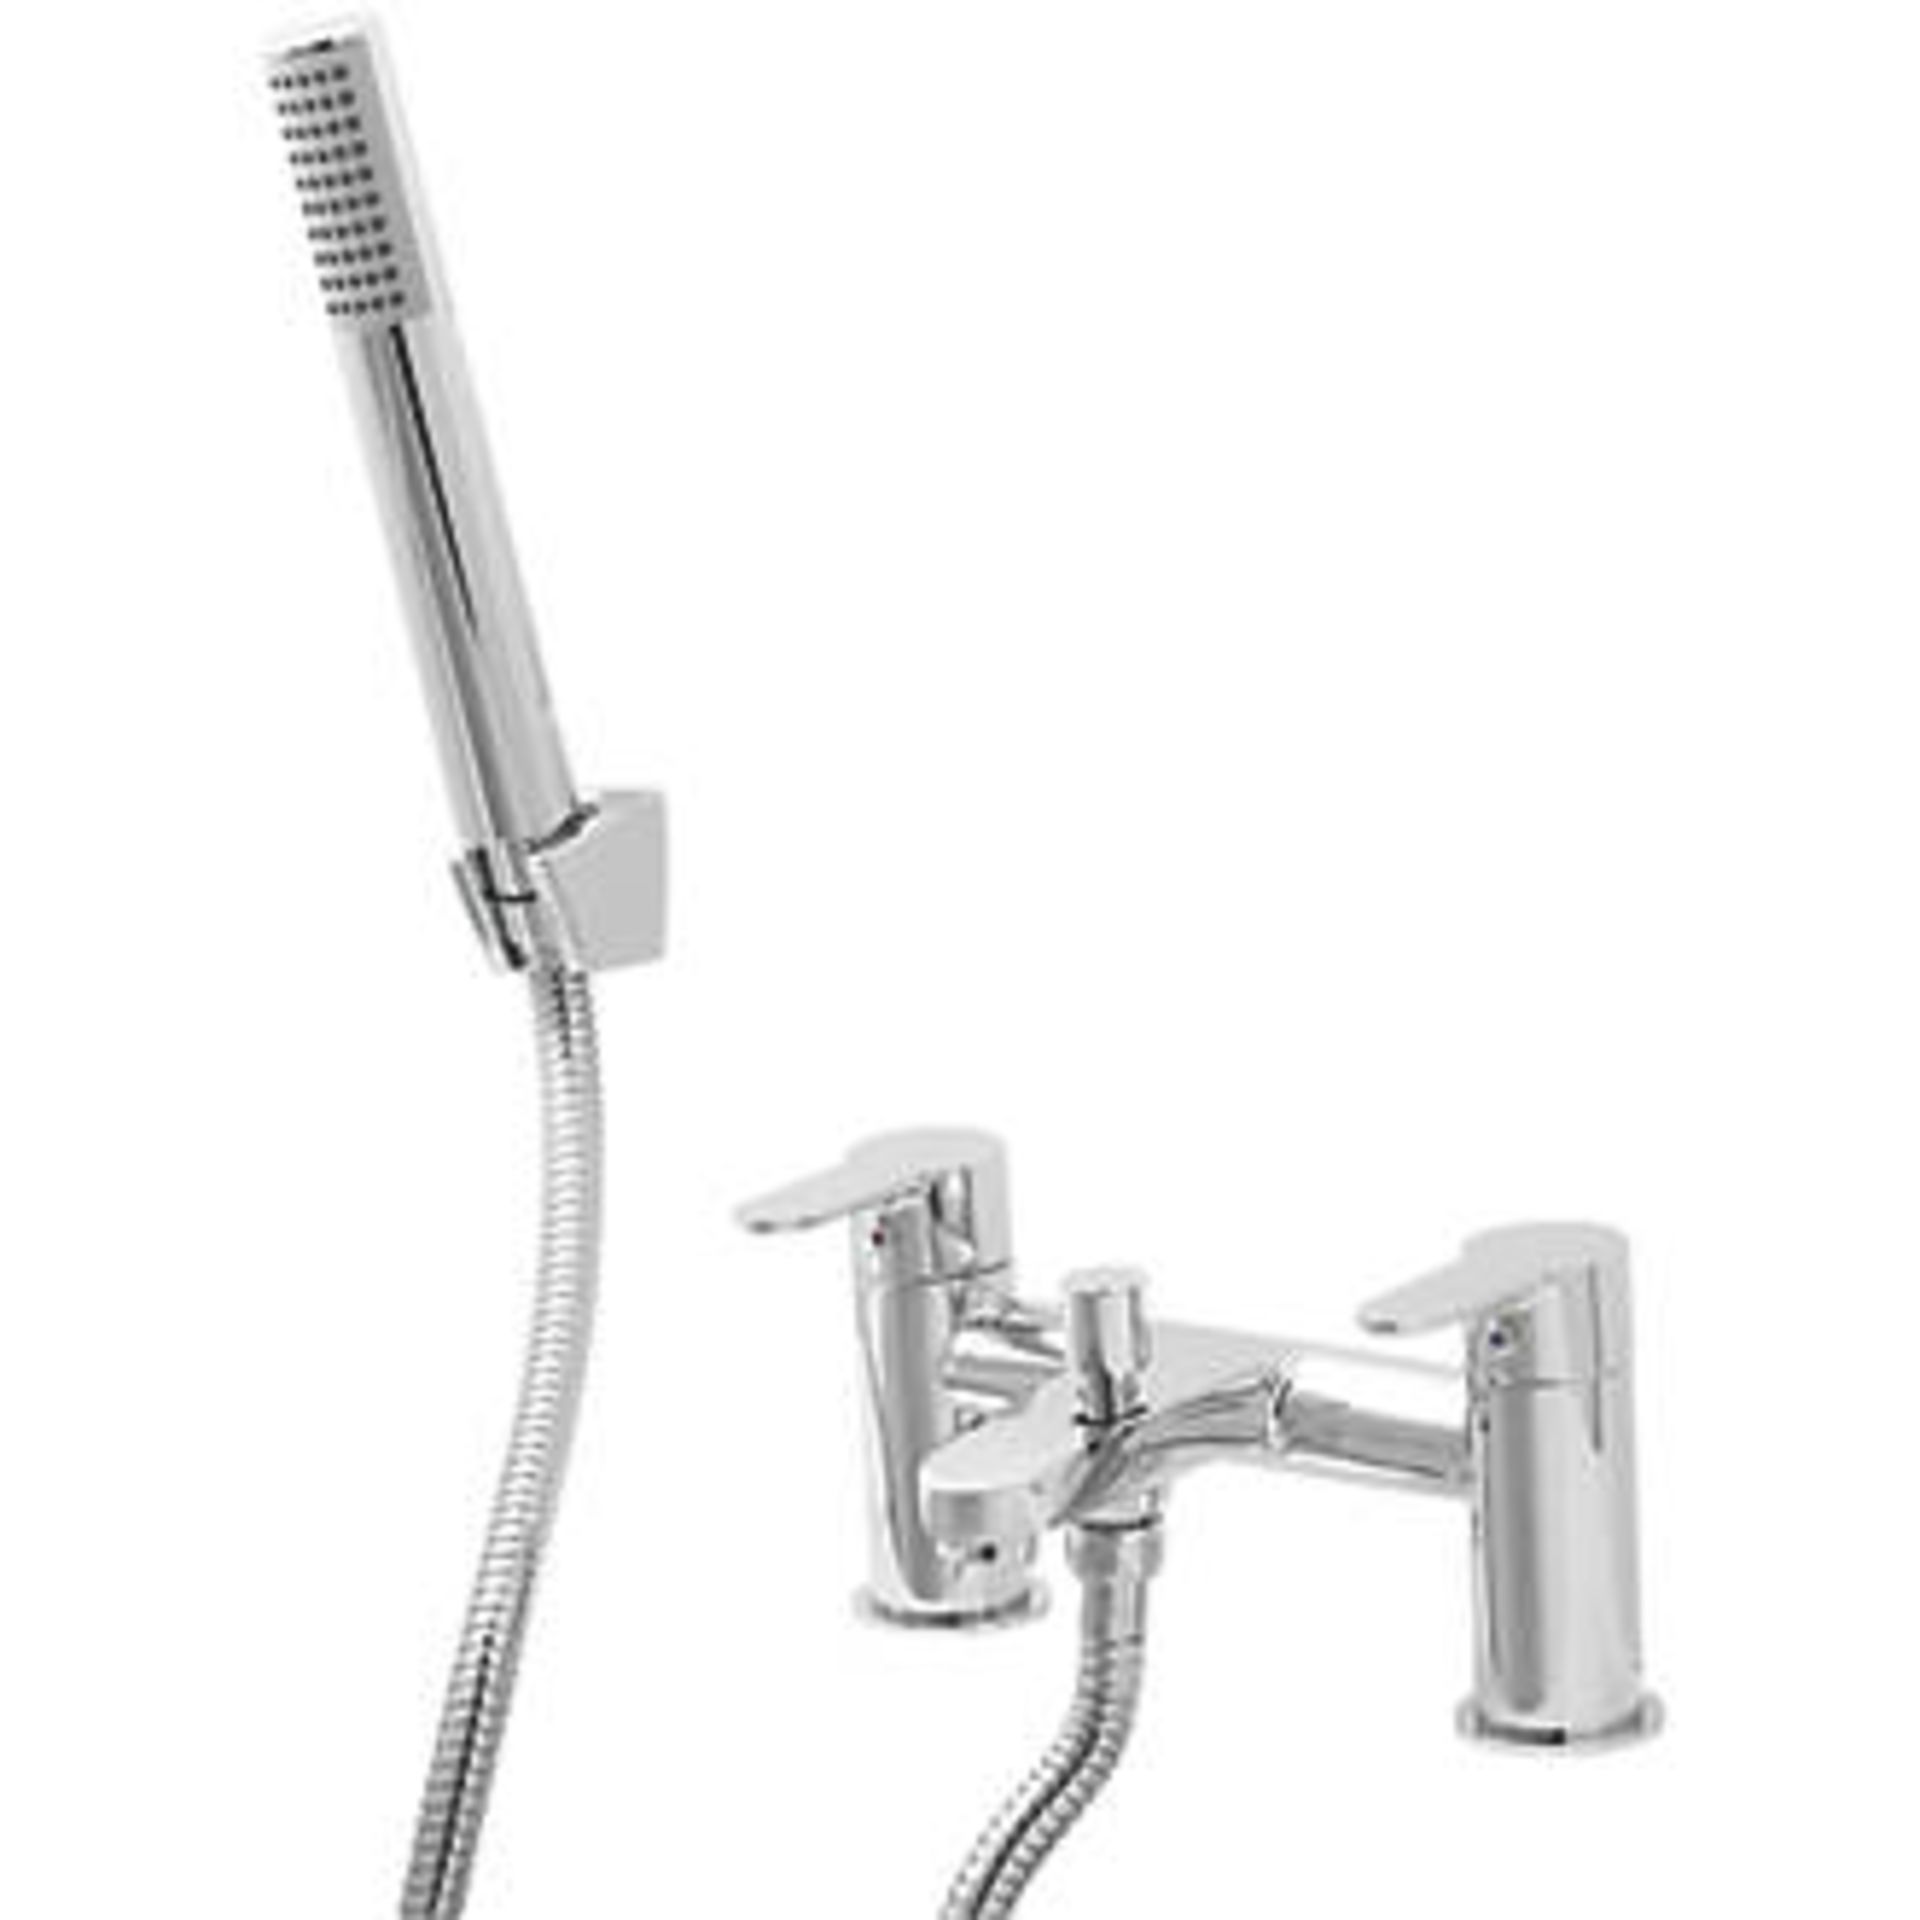 NEW (G165) Lecci Chrome-plated Bath Shower mixer Tap. This contemporary style chrome bath showe...